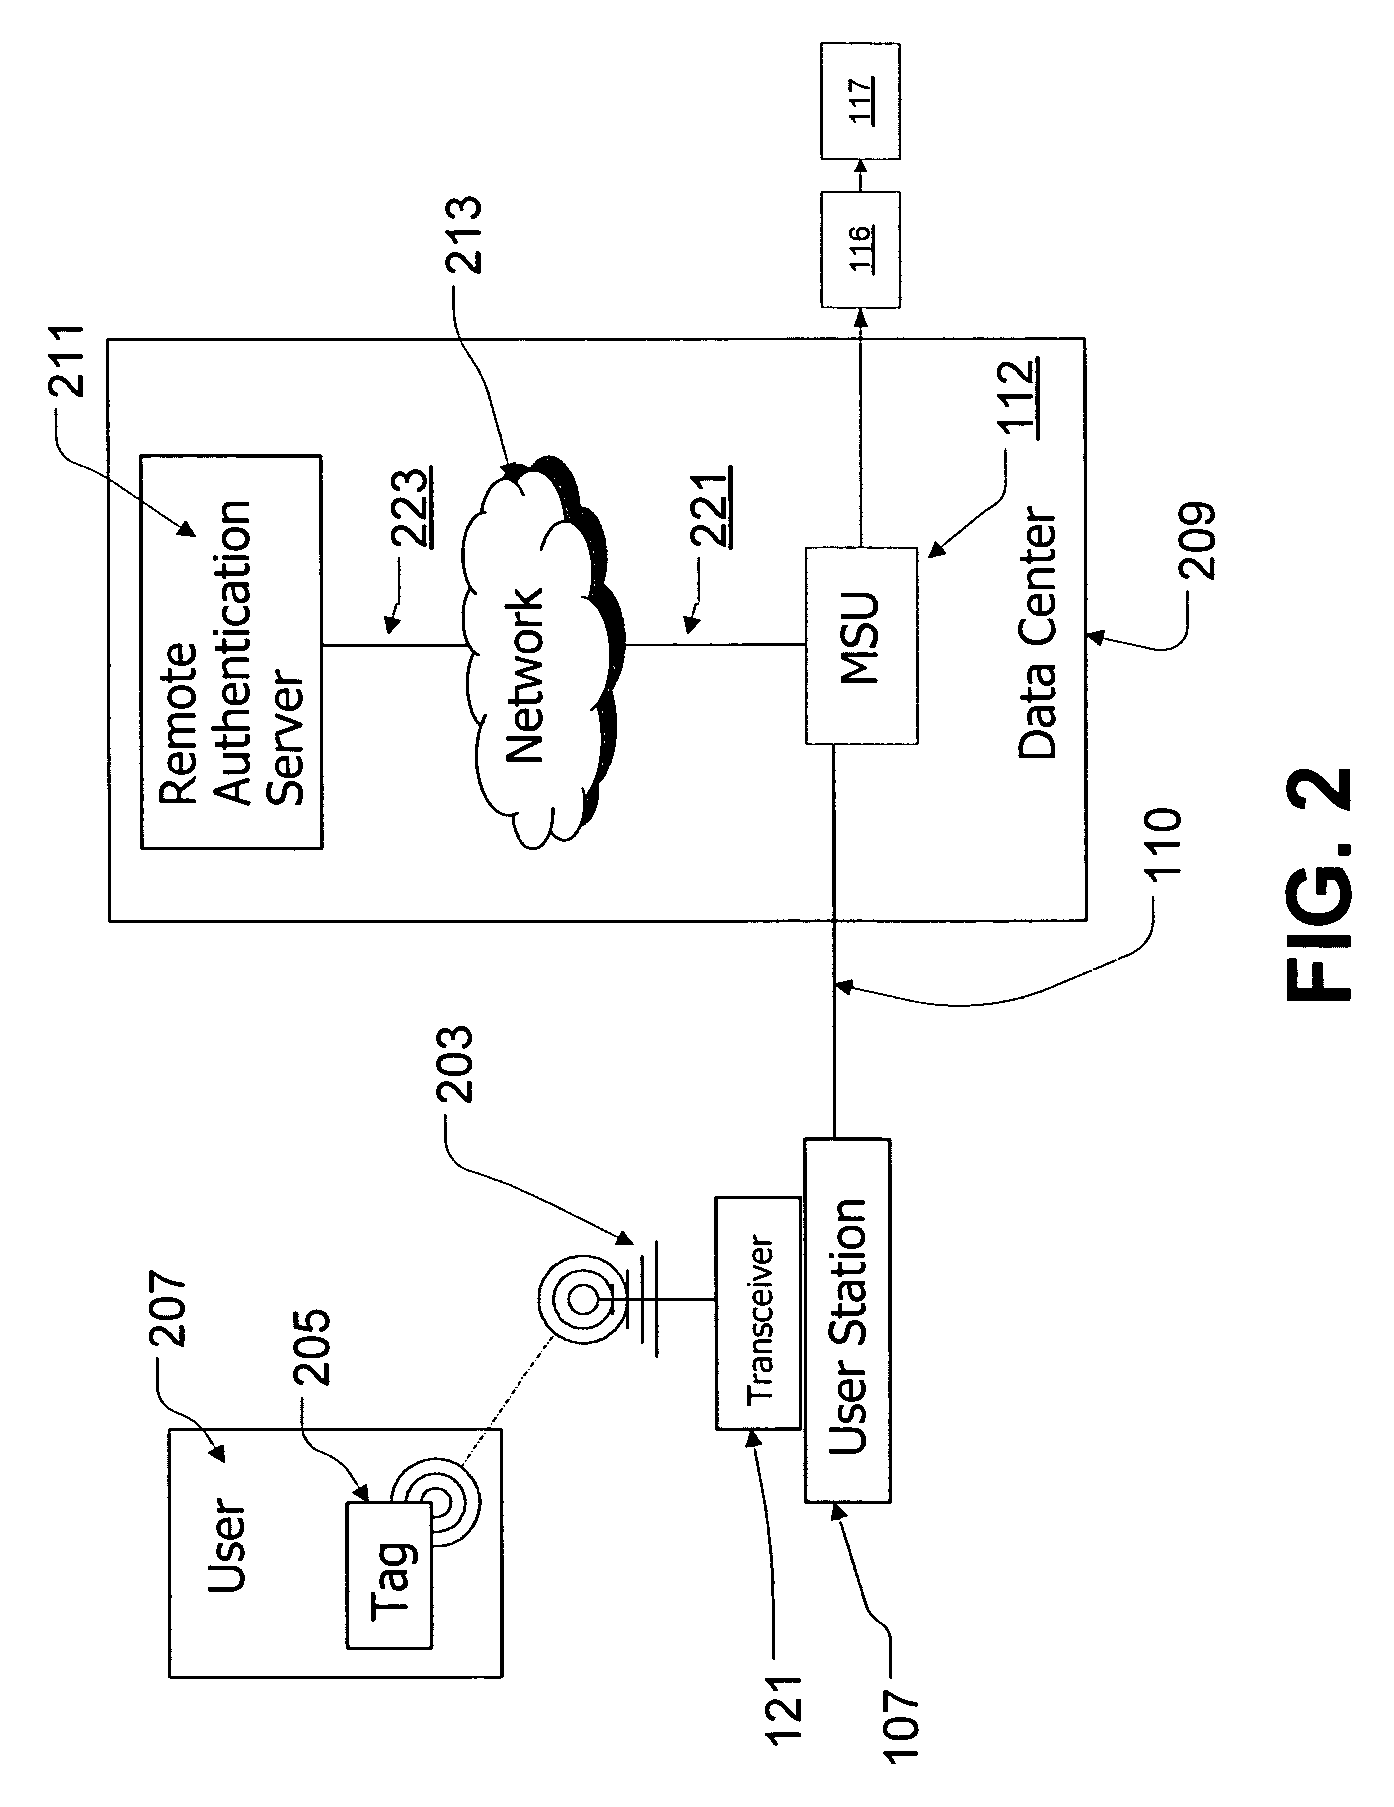 Means and method for providing secure access to KVM switch and other server management systems